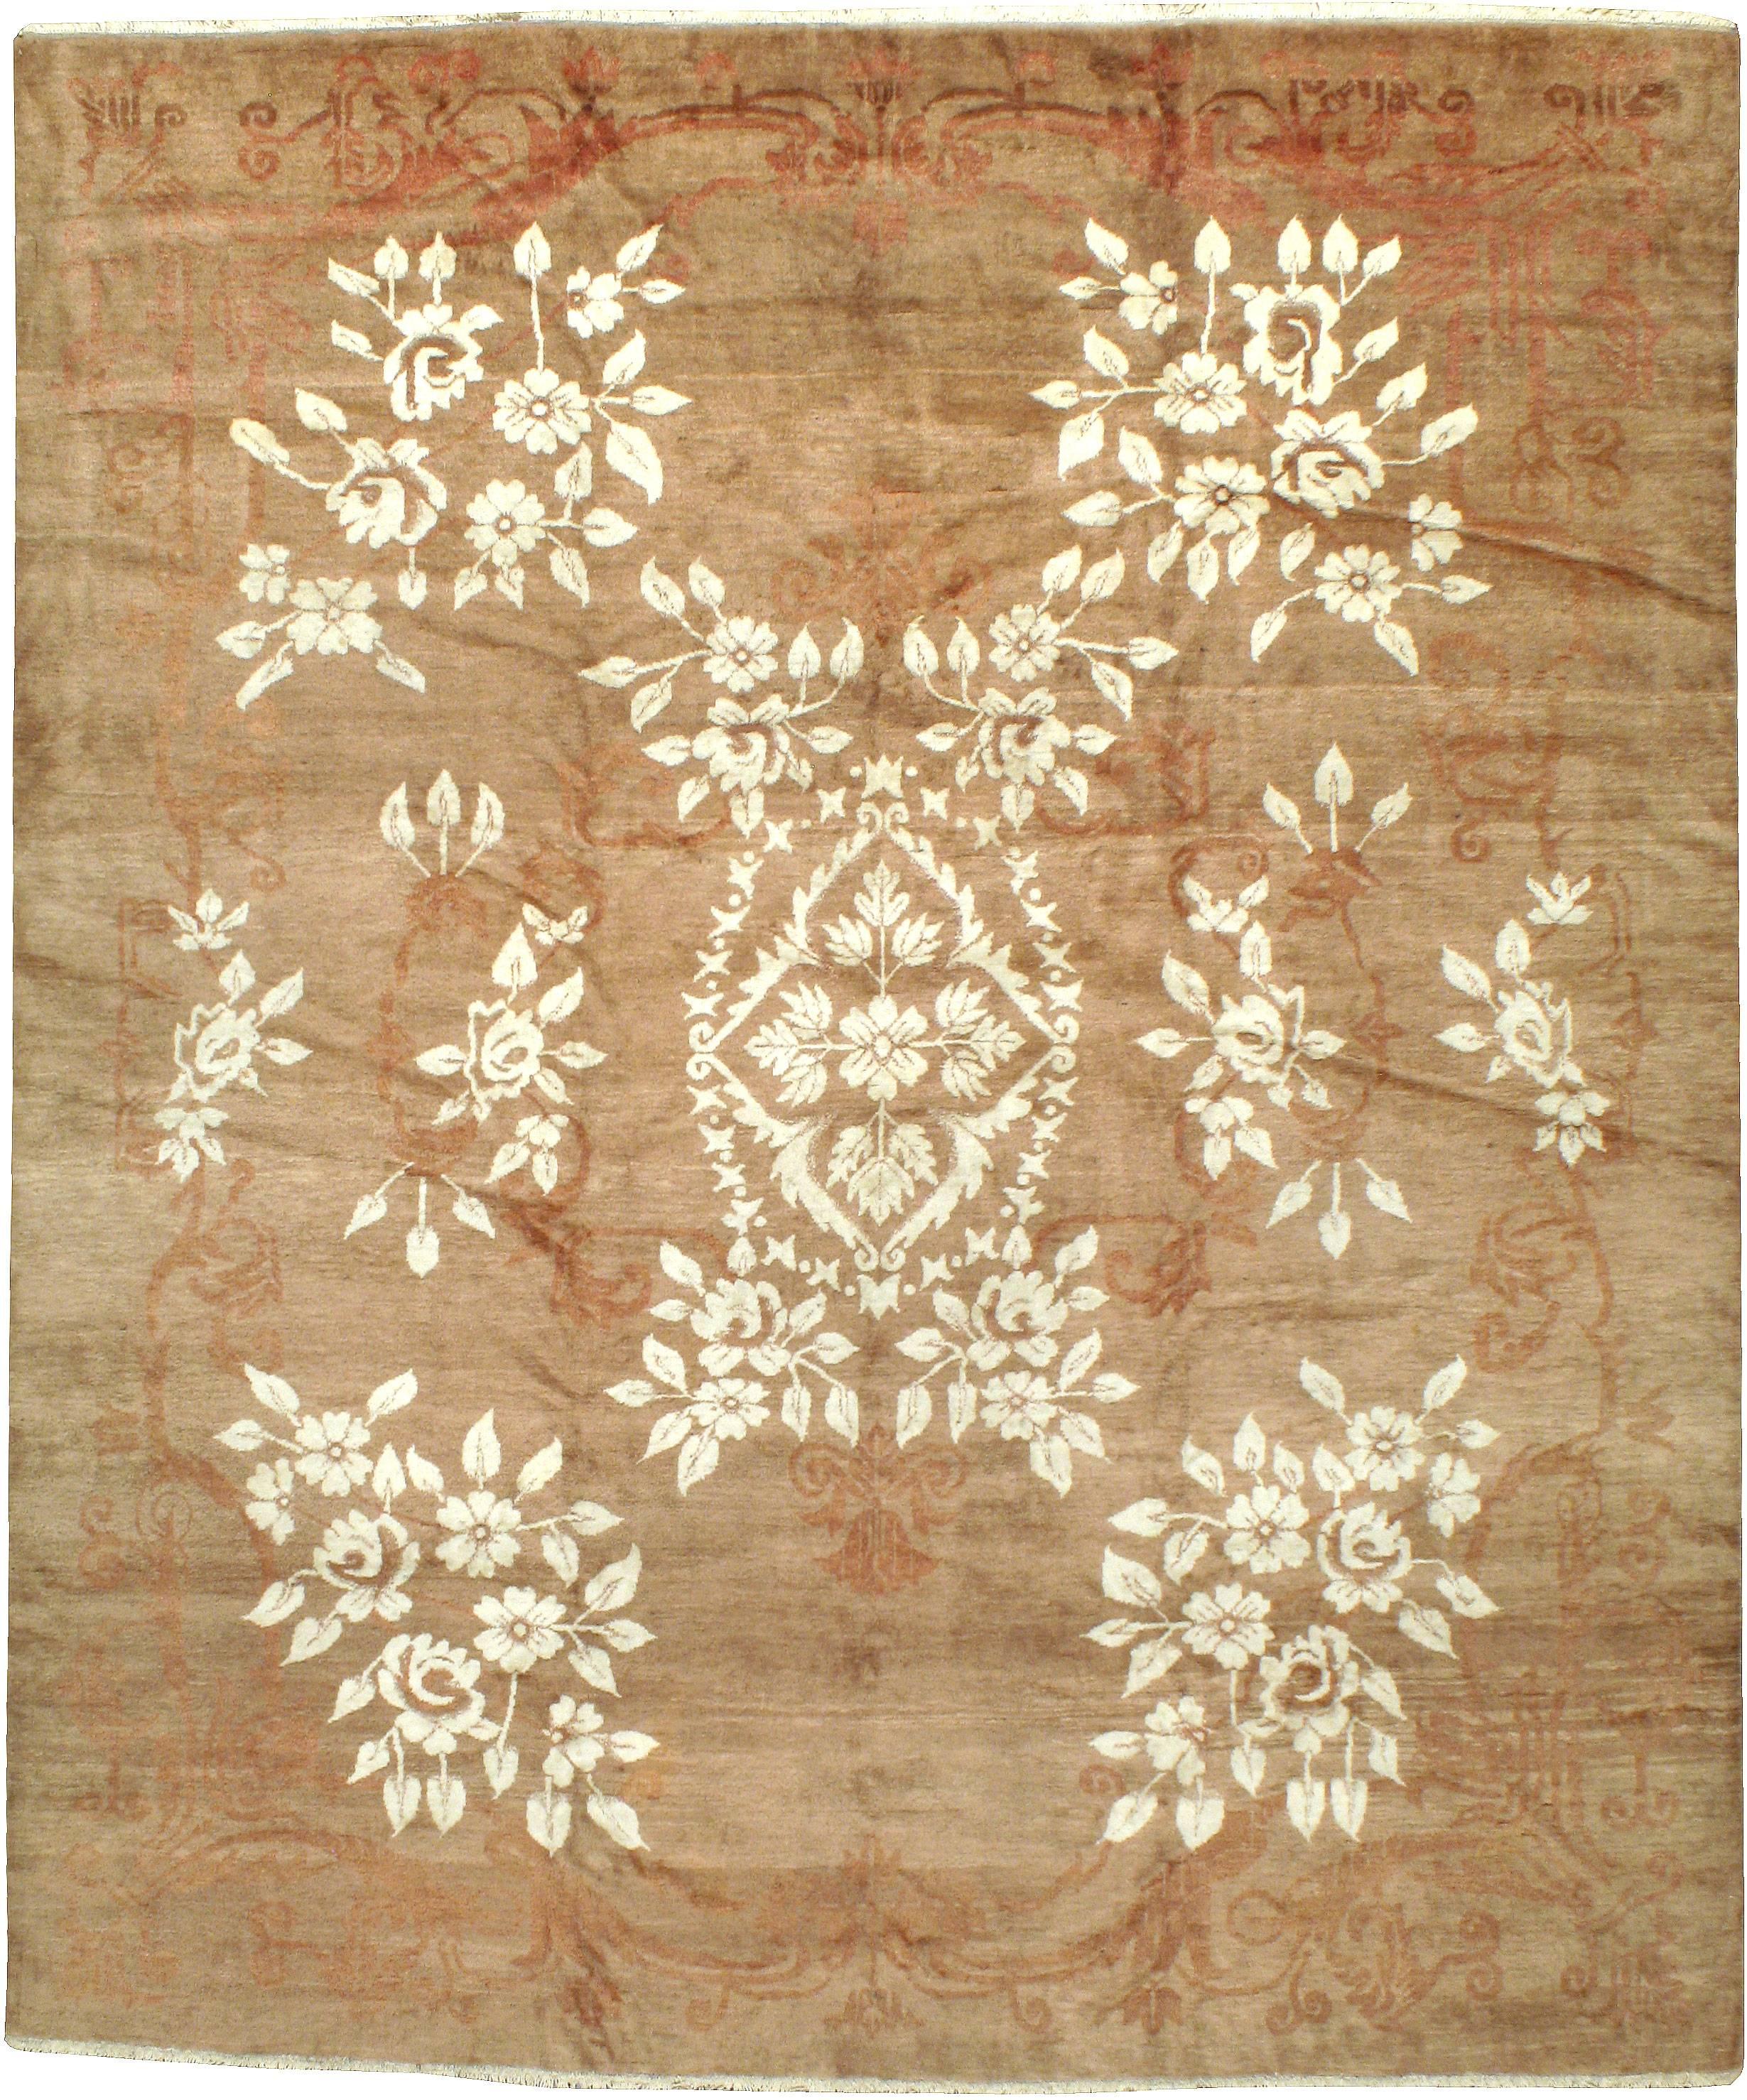 An antique Indian Amritsar carpet from the first quarter of the 20th century.